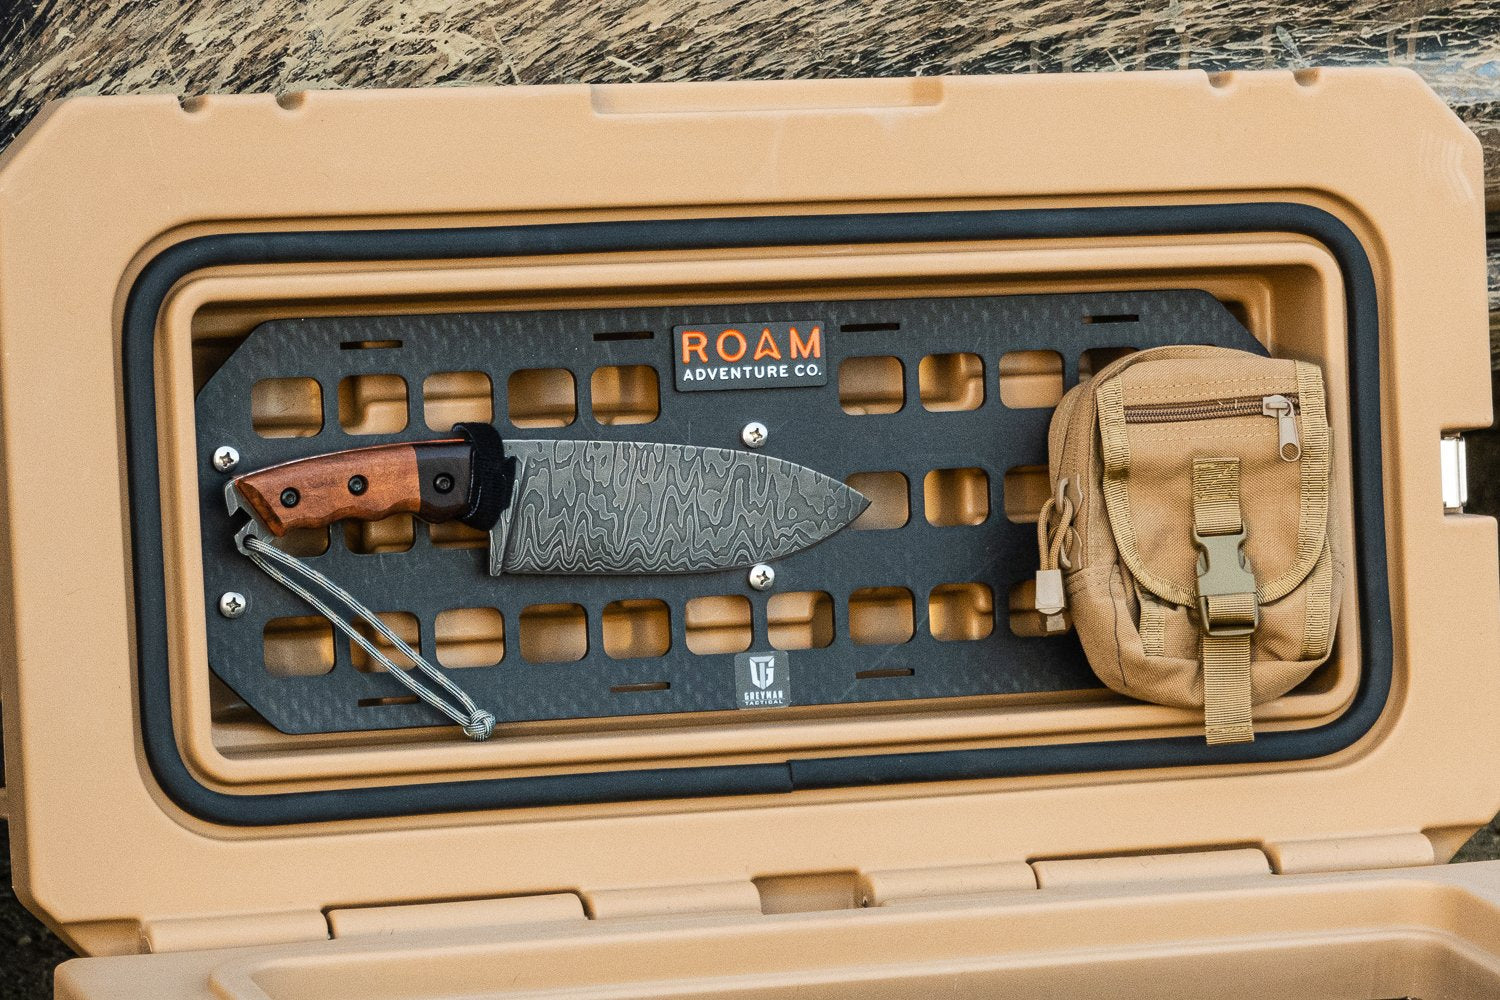 82L Rugged Case Molle Panel